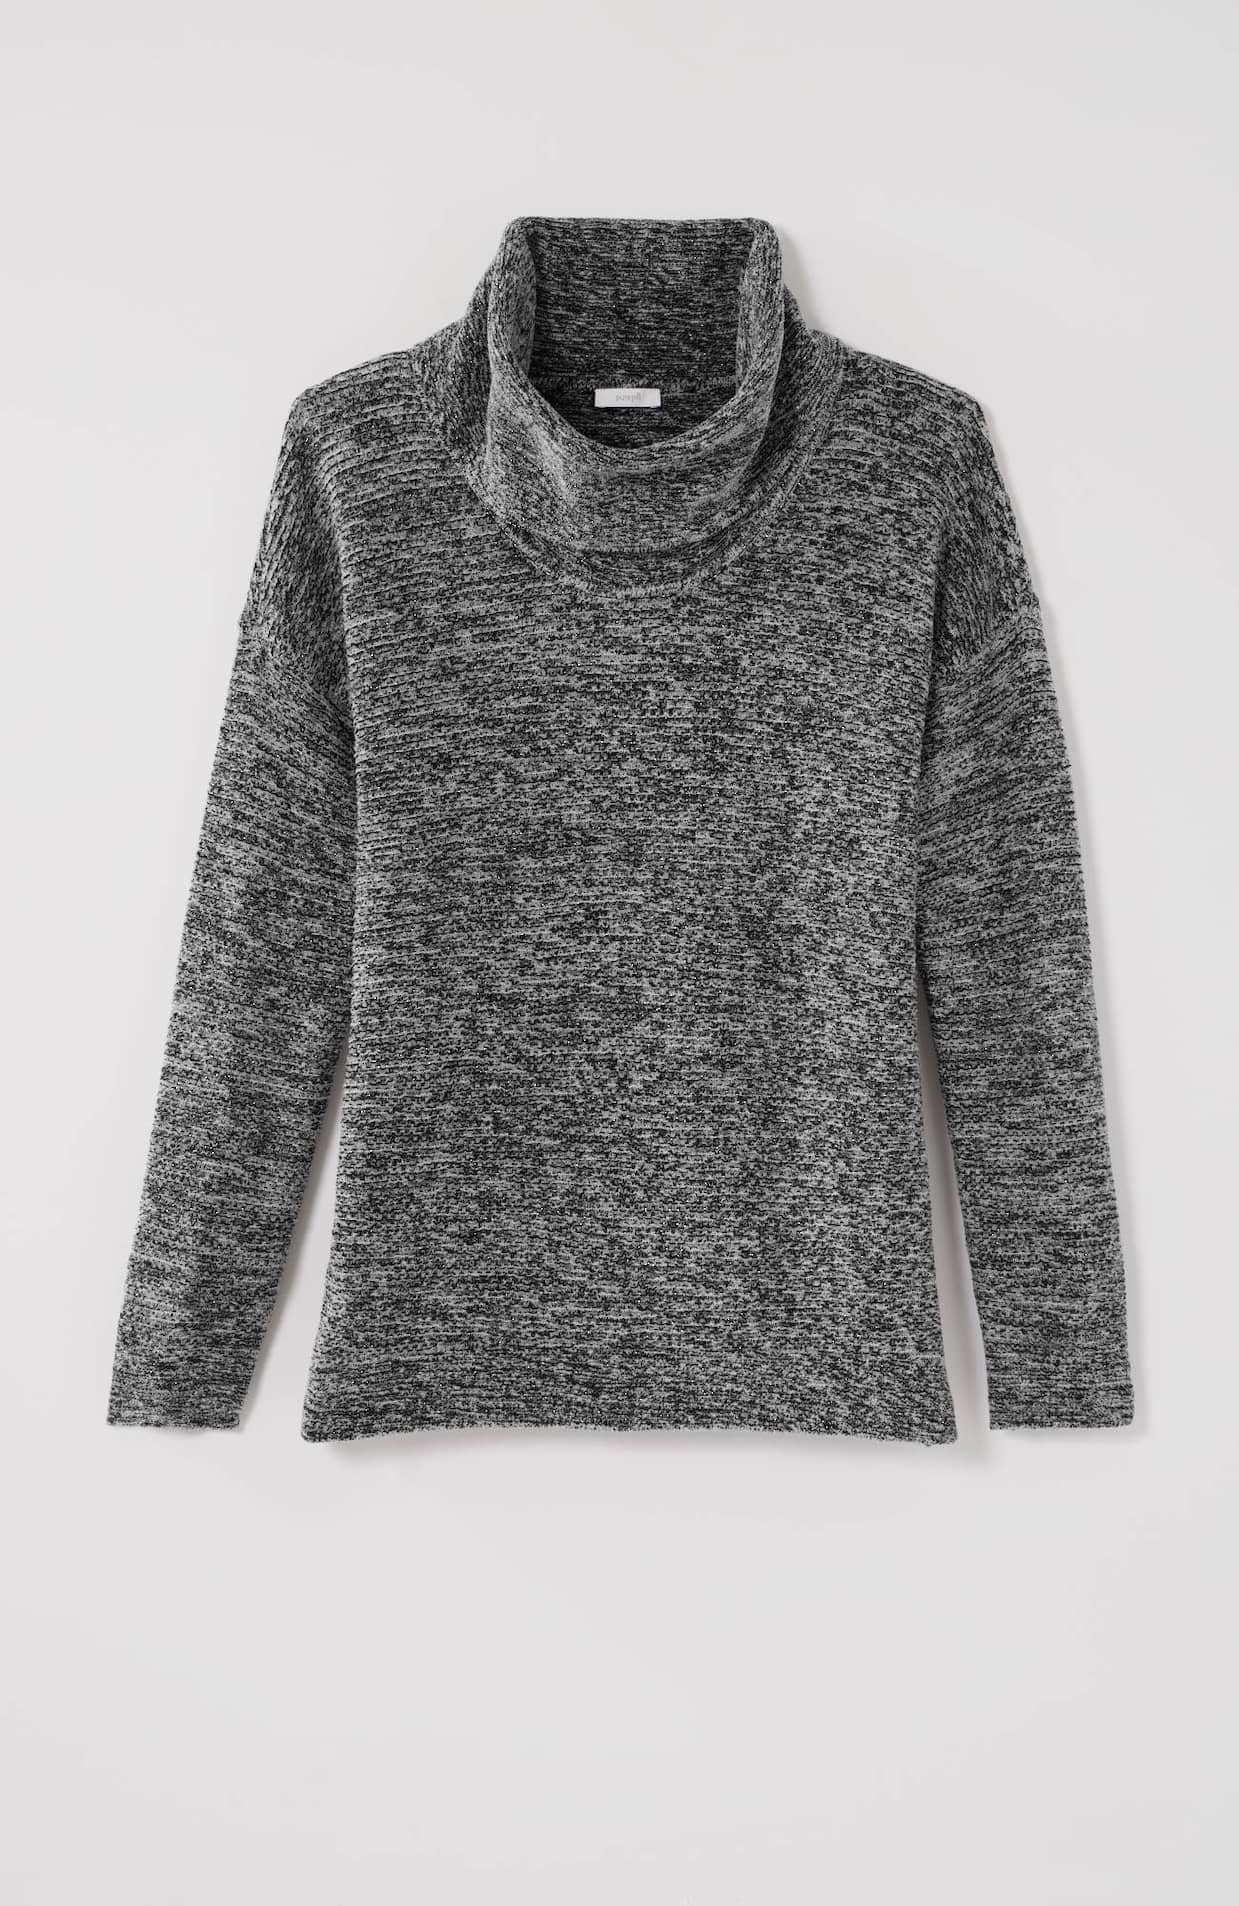 Inside Out Crew Neck Jumper - Ready-to-Wear 1A8PKT